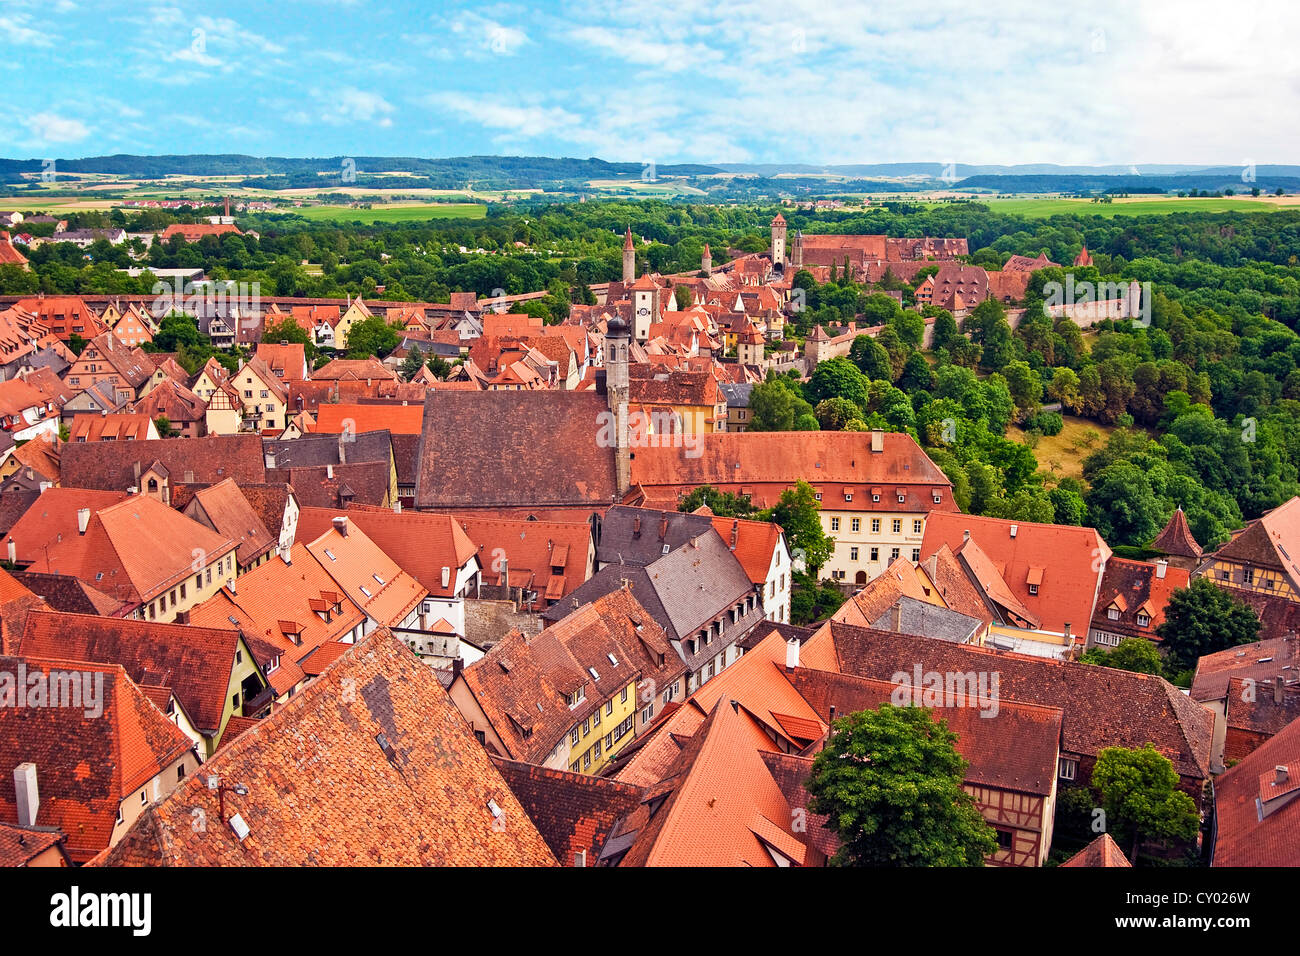 Rothenburg ob der Tauber, Bavaria, Germany, A view over the rooftops of the 13th century Medieval town Stock Photo